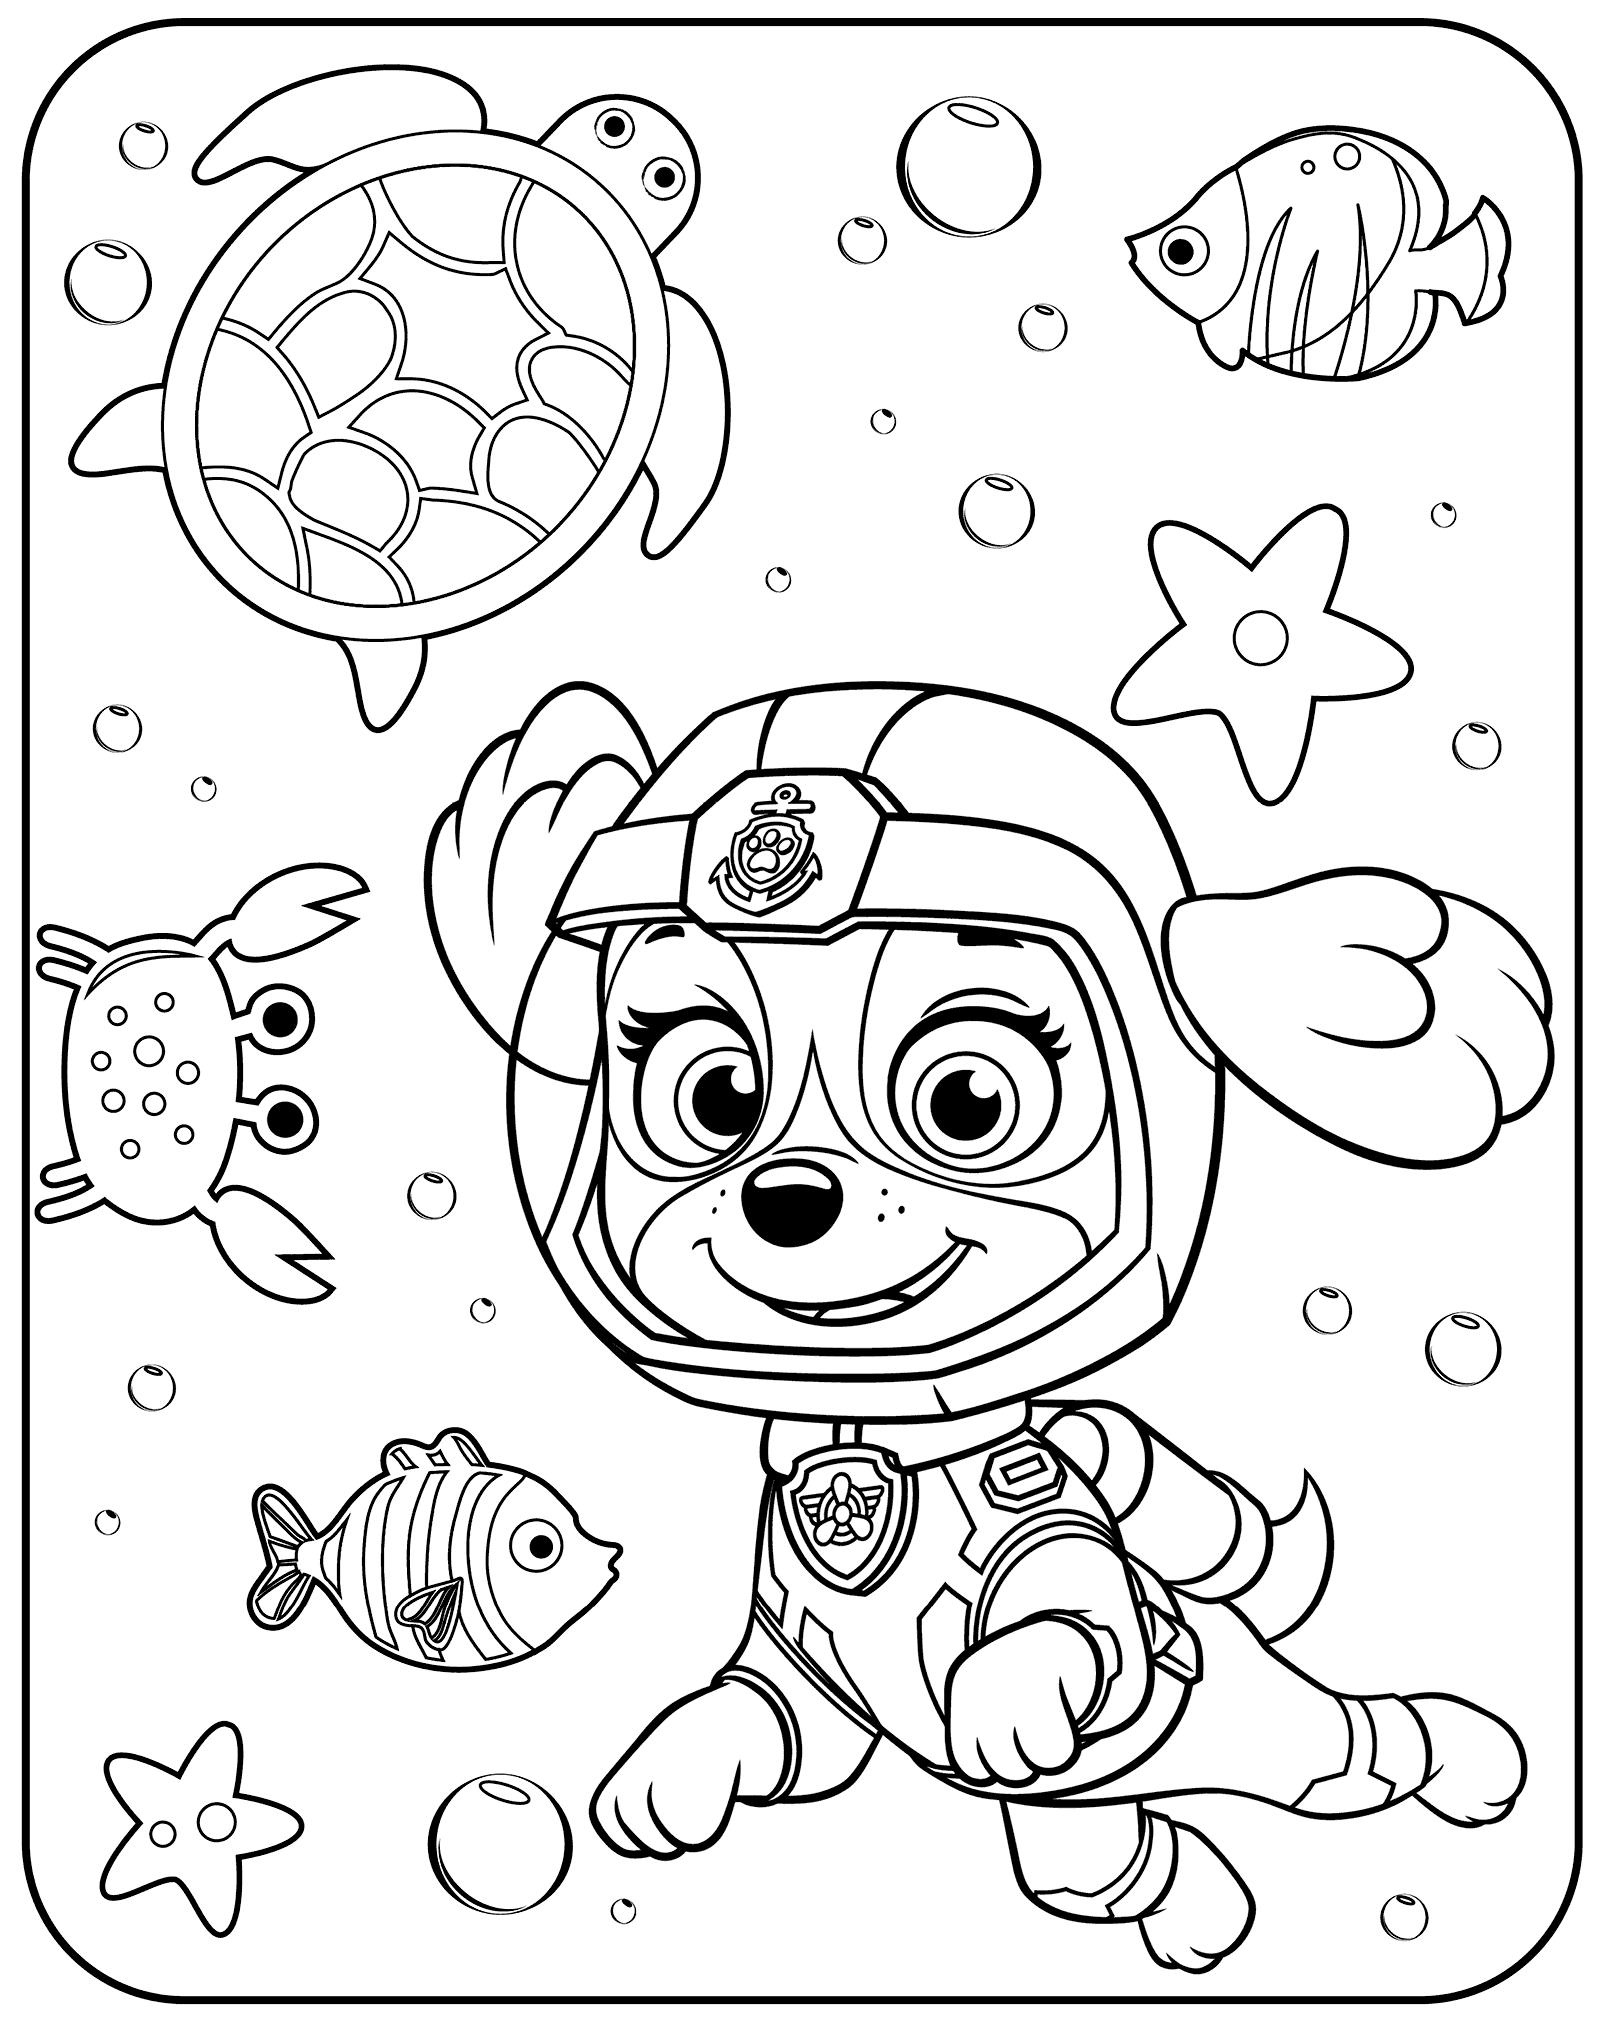 Paw Patrol Coloring Pages FREE Printable 20